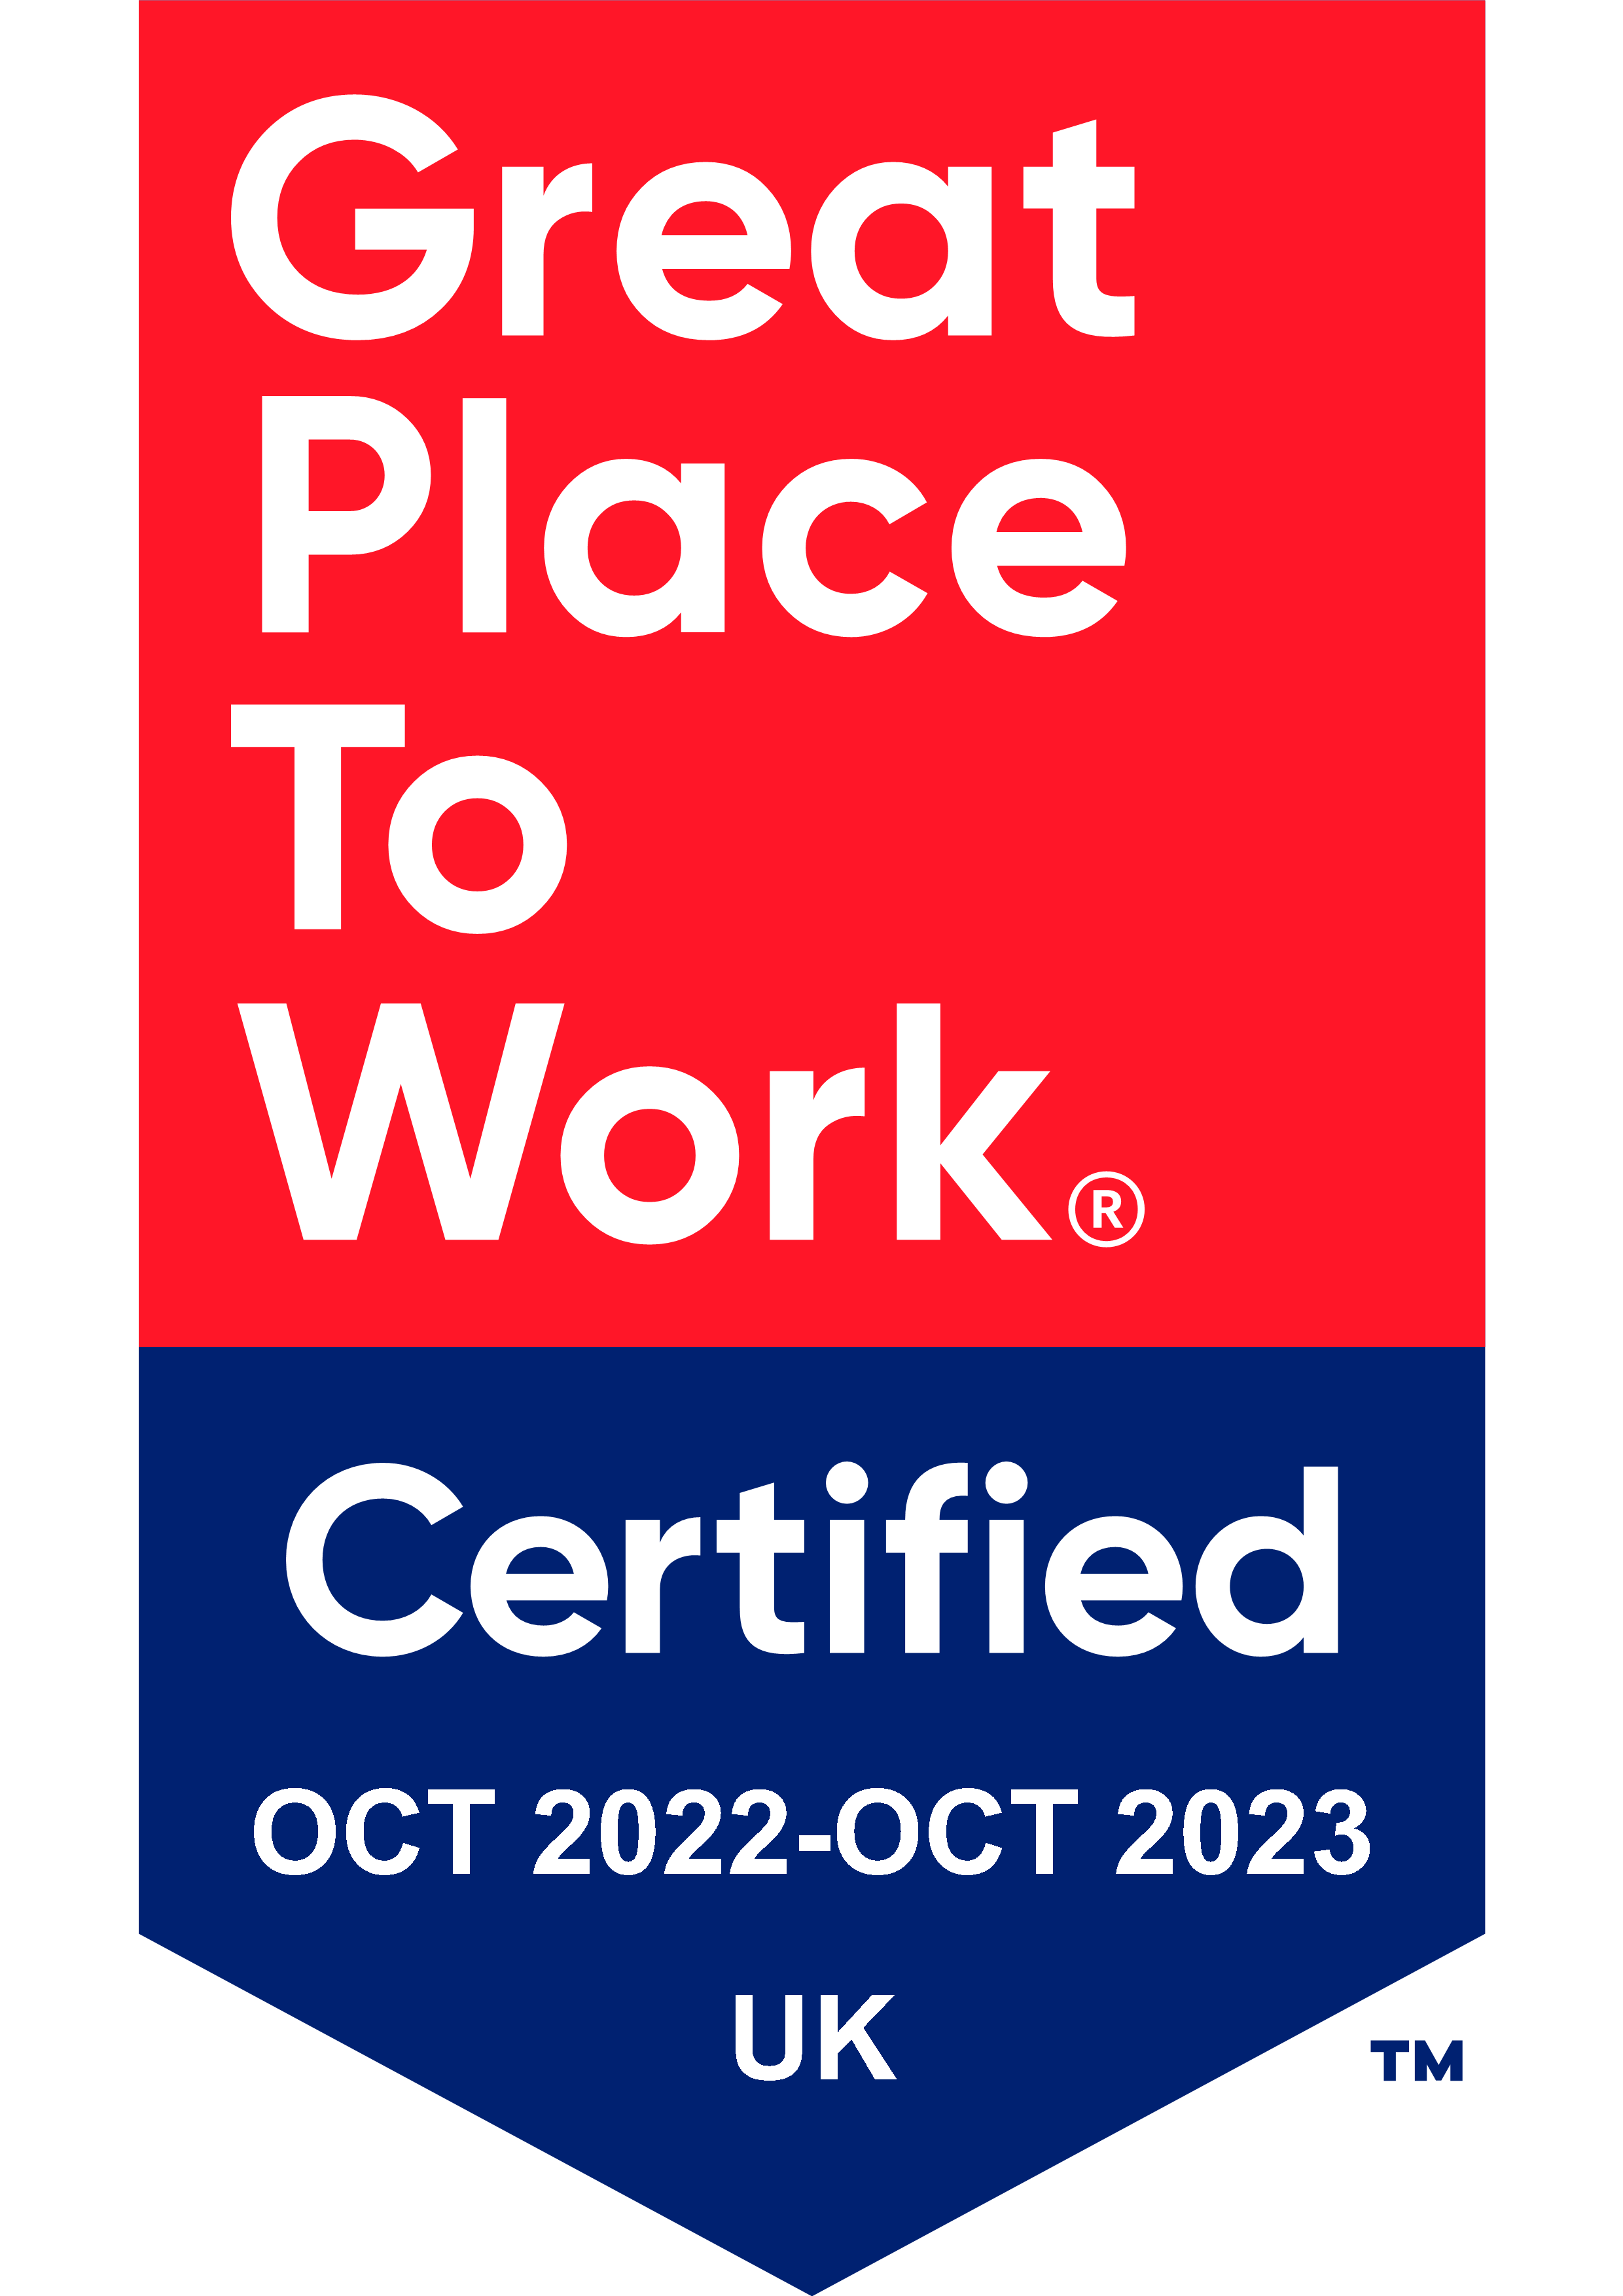 The_Marketing_Pod_2022_Certification_Badge.png